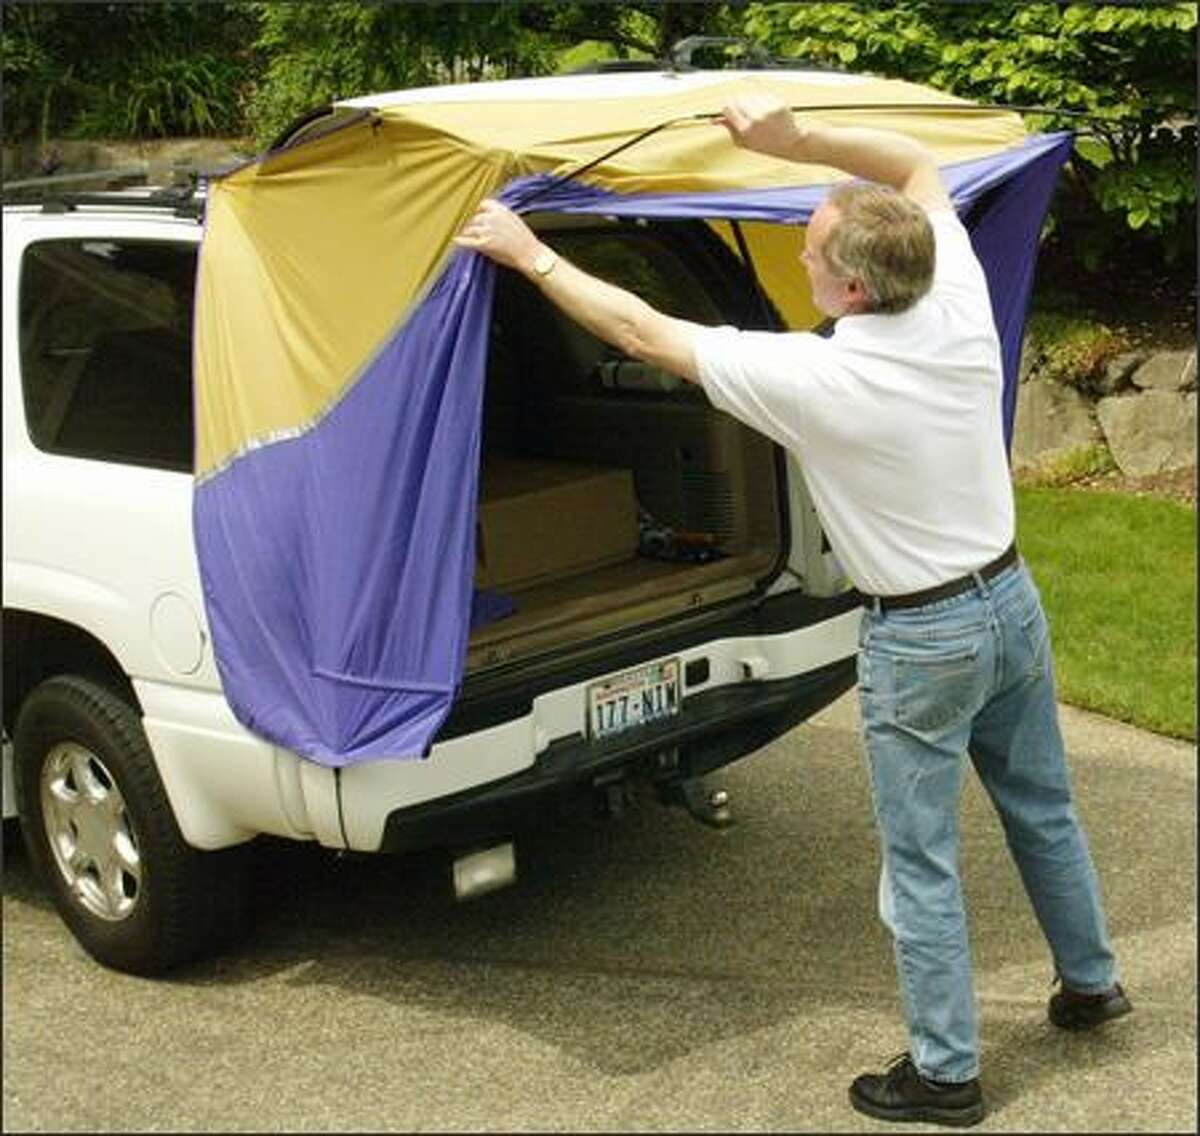 Bill Christenson, co-owner of Bumperchute along with his wife, Renee, sets up one of the portable canopies on a vehicle's back end. Now in their second year of operation, the Christensons have already cracked one key market: emergency vehicles.